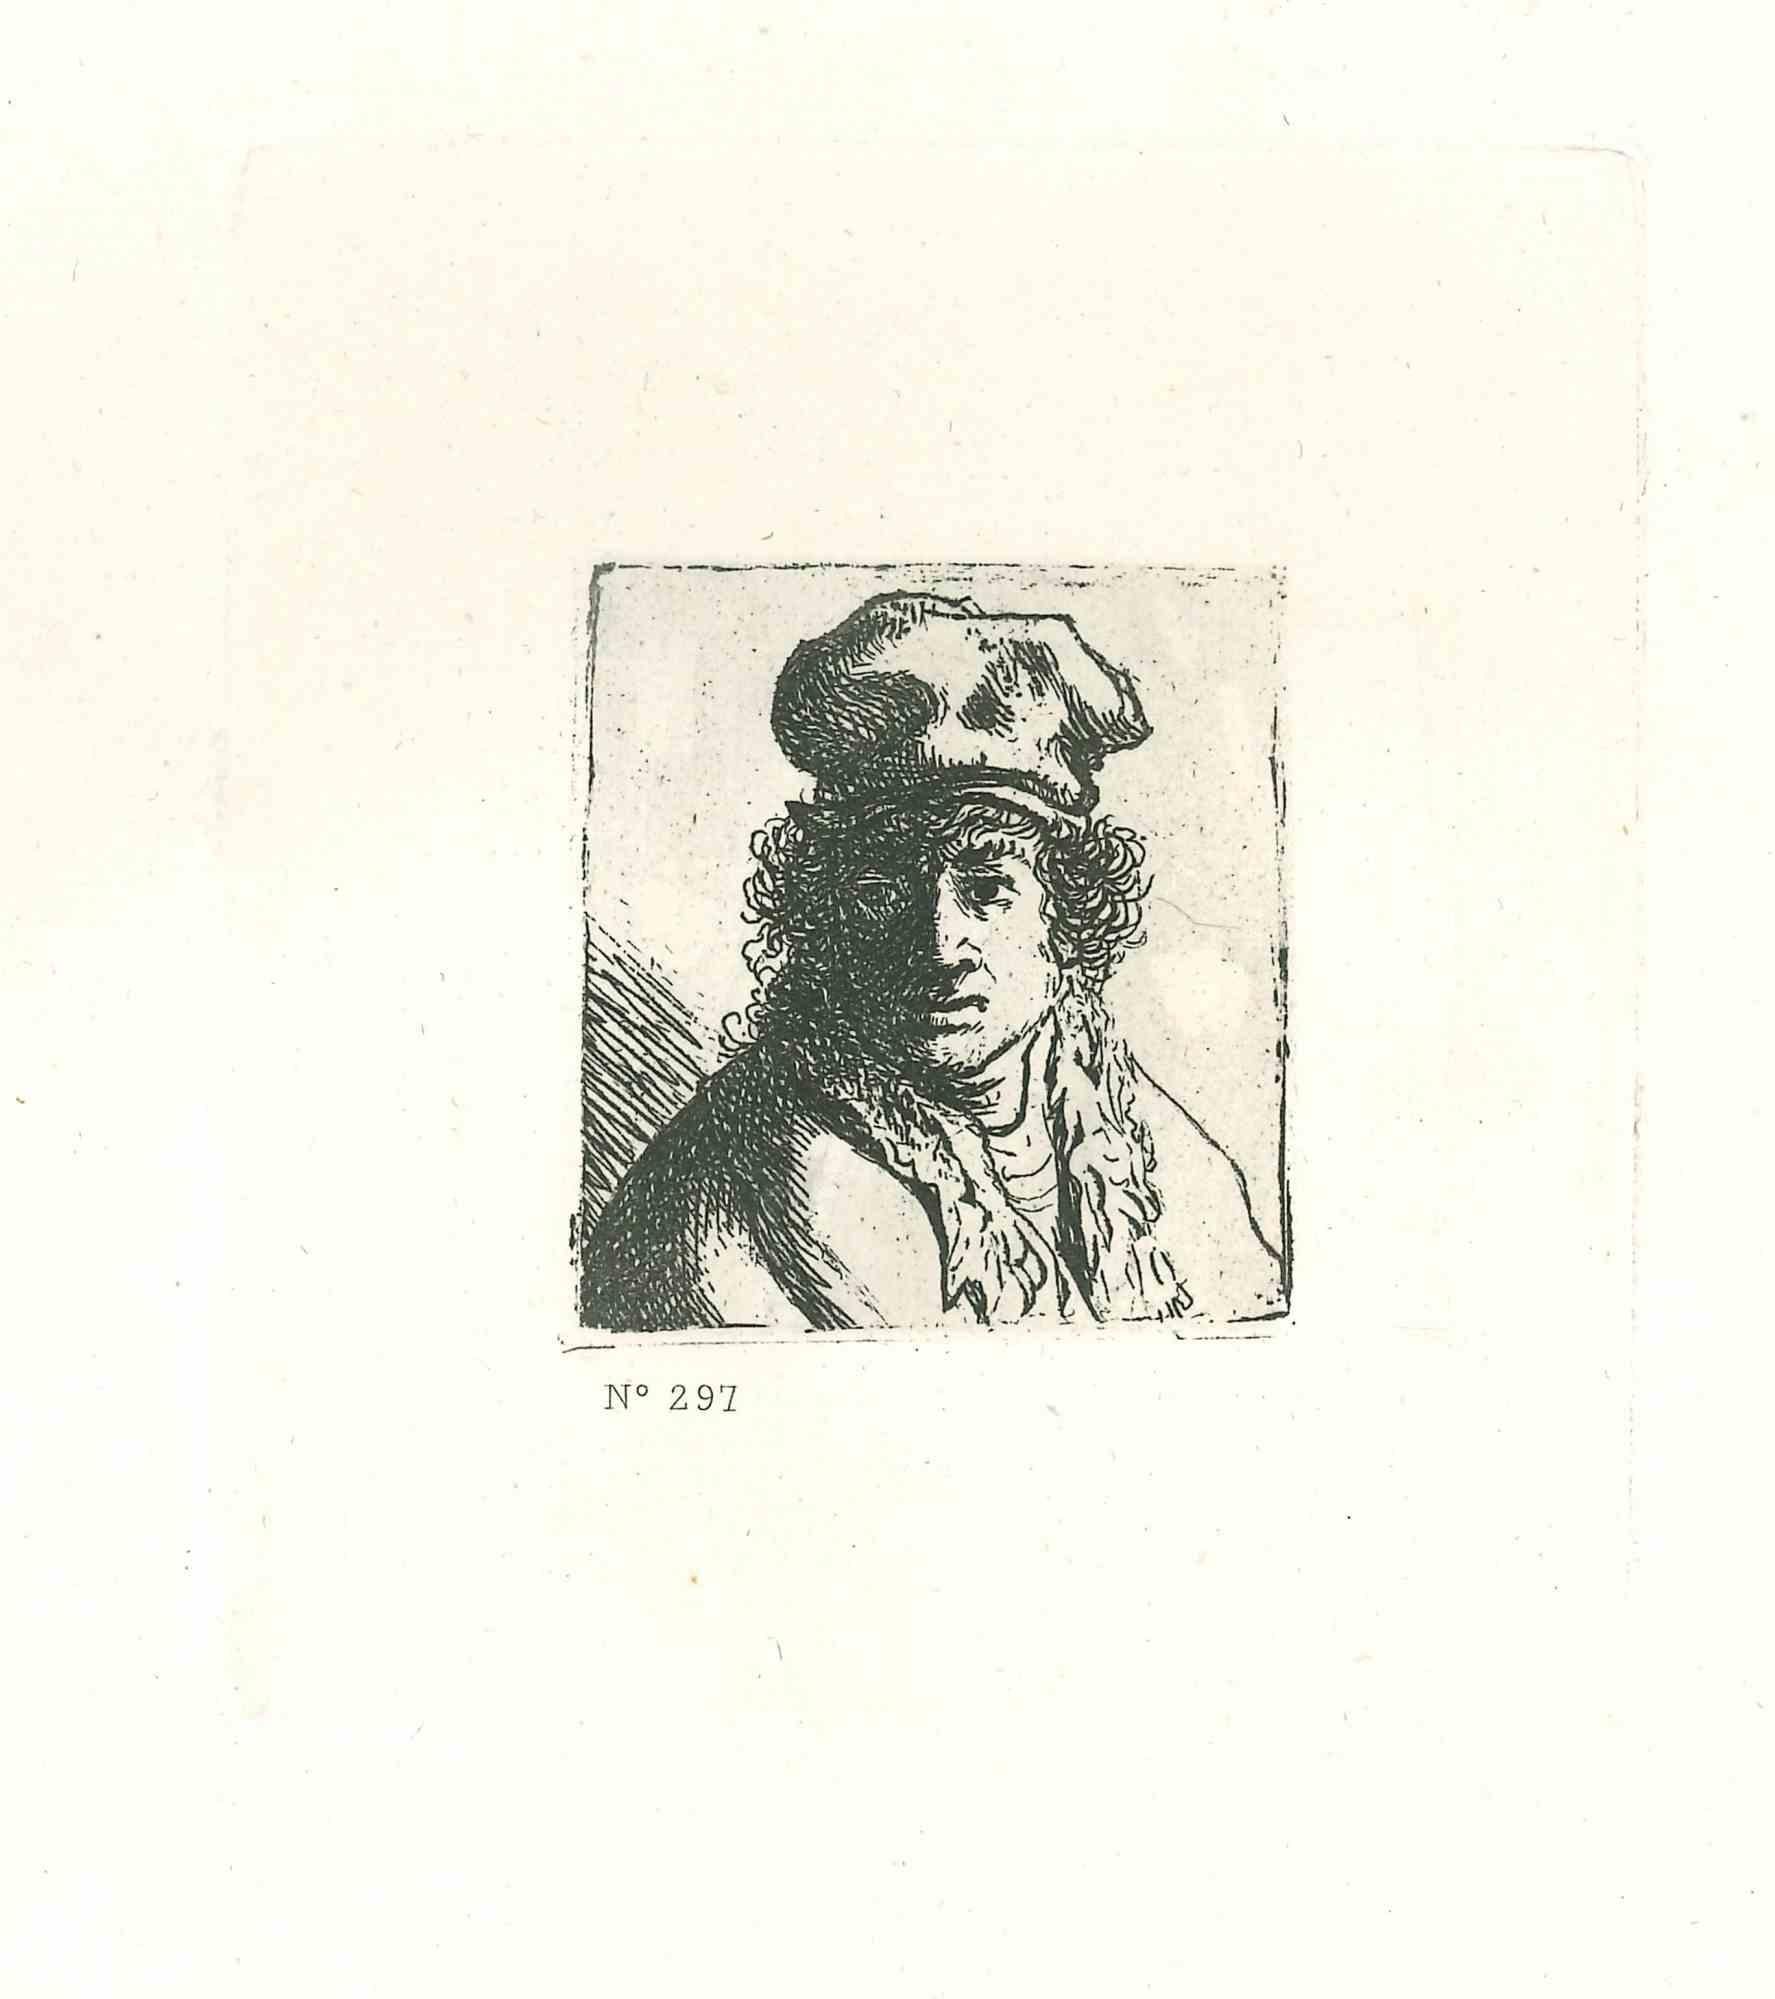 Charles Amand Durand Figurative Print - Portrait - Engraving after Rembrandt - 19th Century